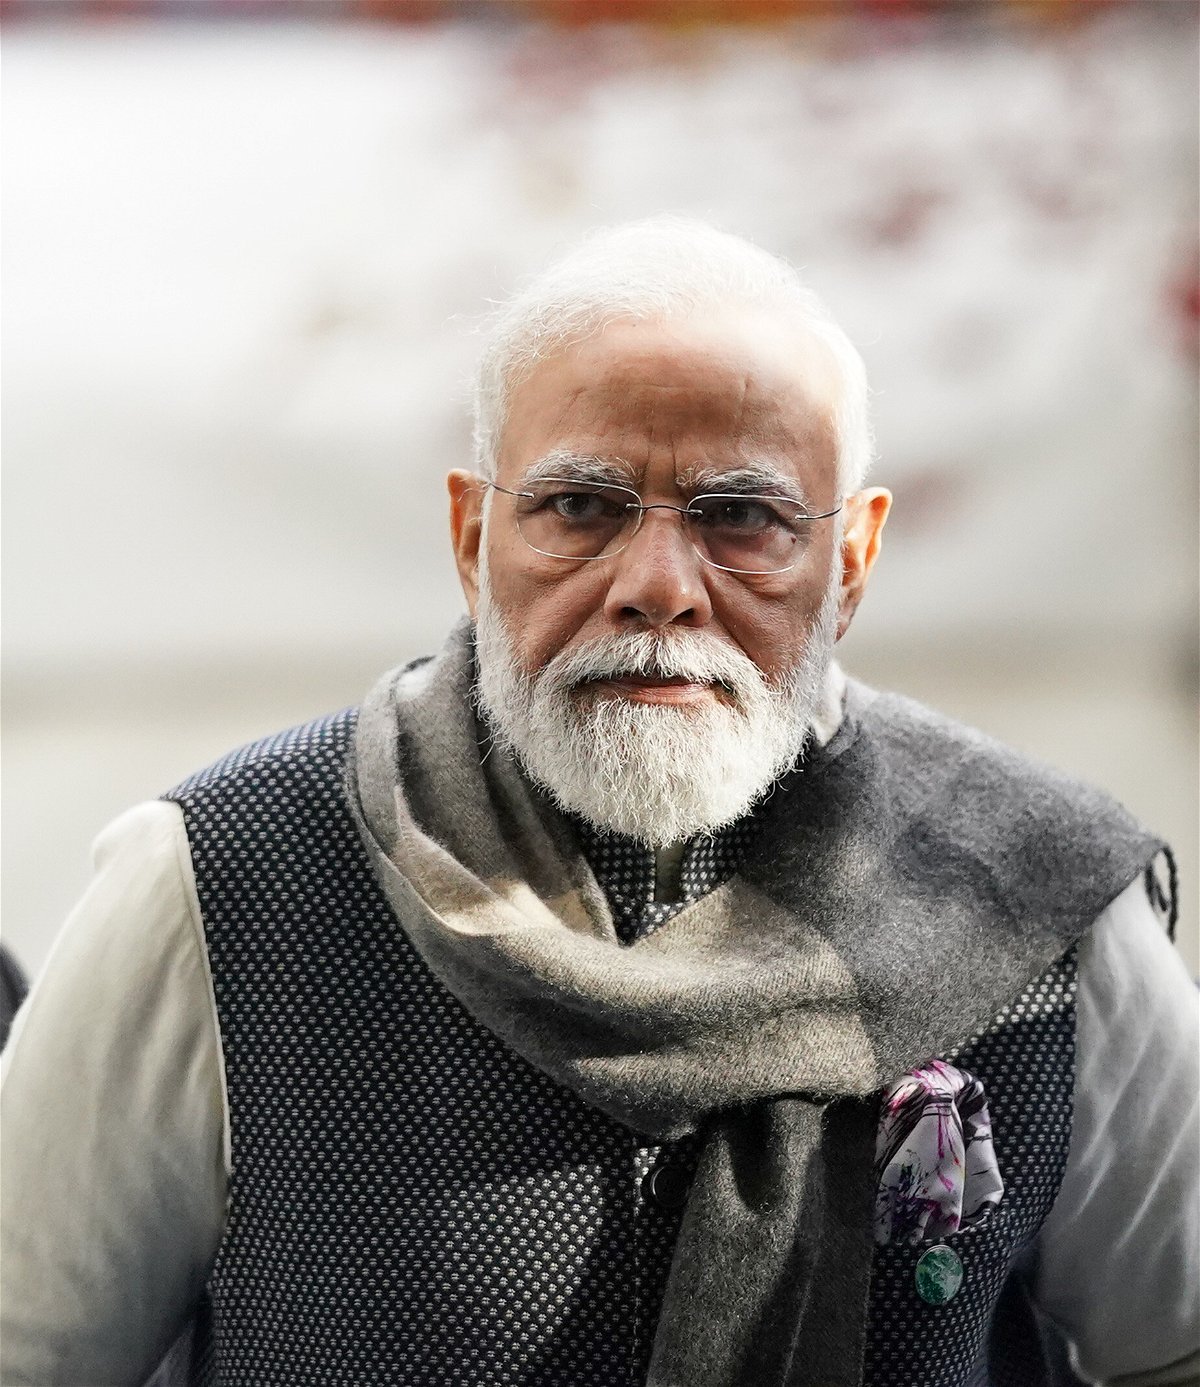 <i>Ian Forsyth/Getty Images</i><br/>Narendra Modi's Twitter account was hacked with the announcement that India would adopt Bitcoin. Modi has more than 70 million followers on Twitter.